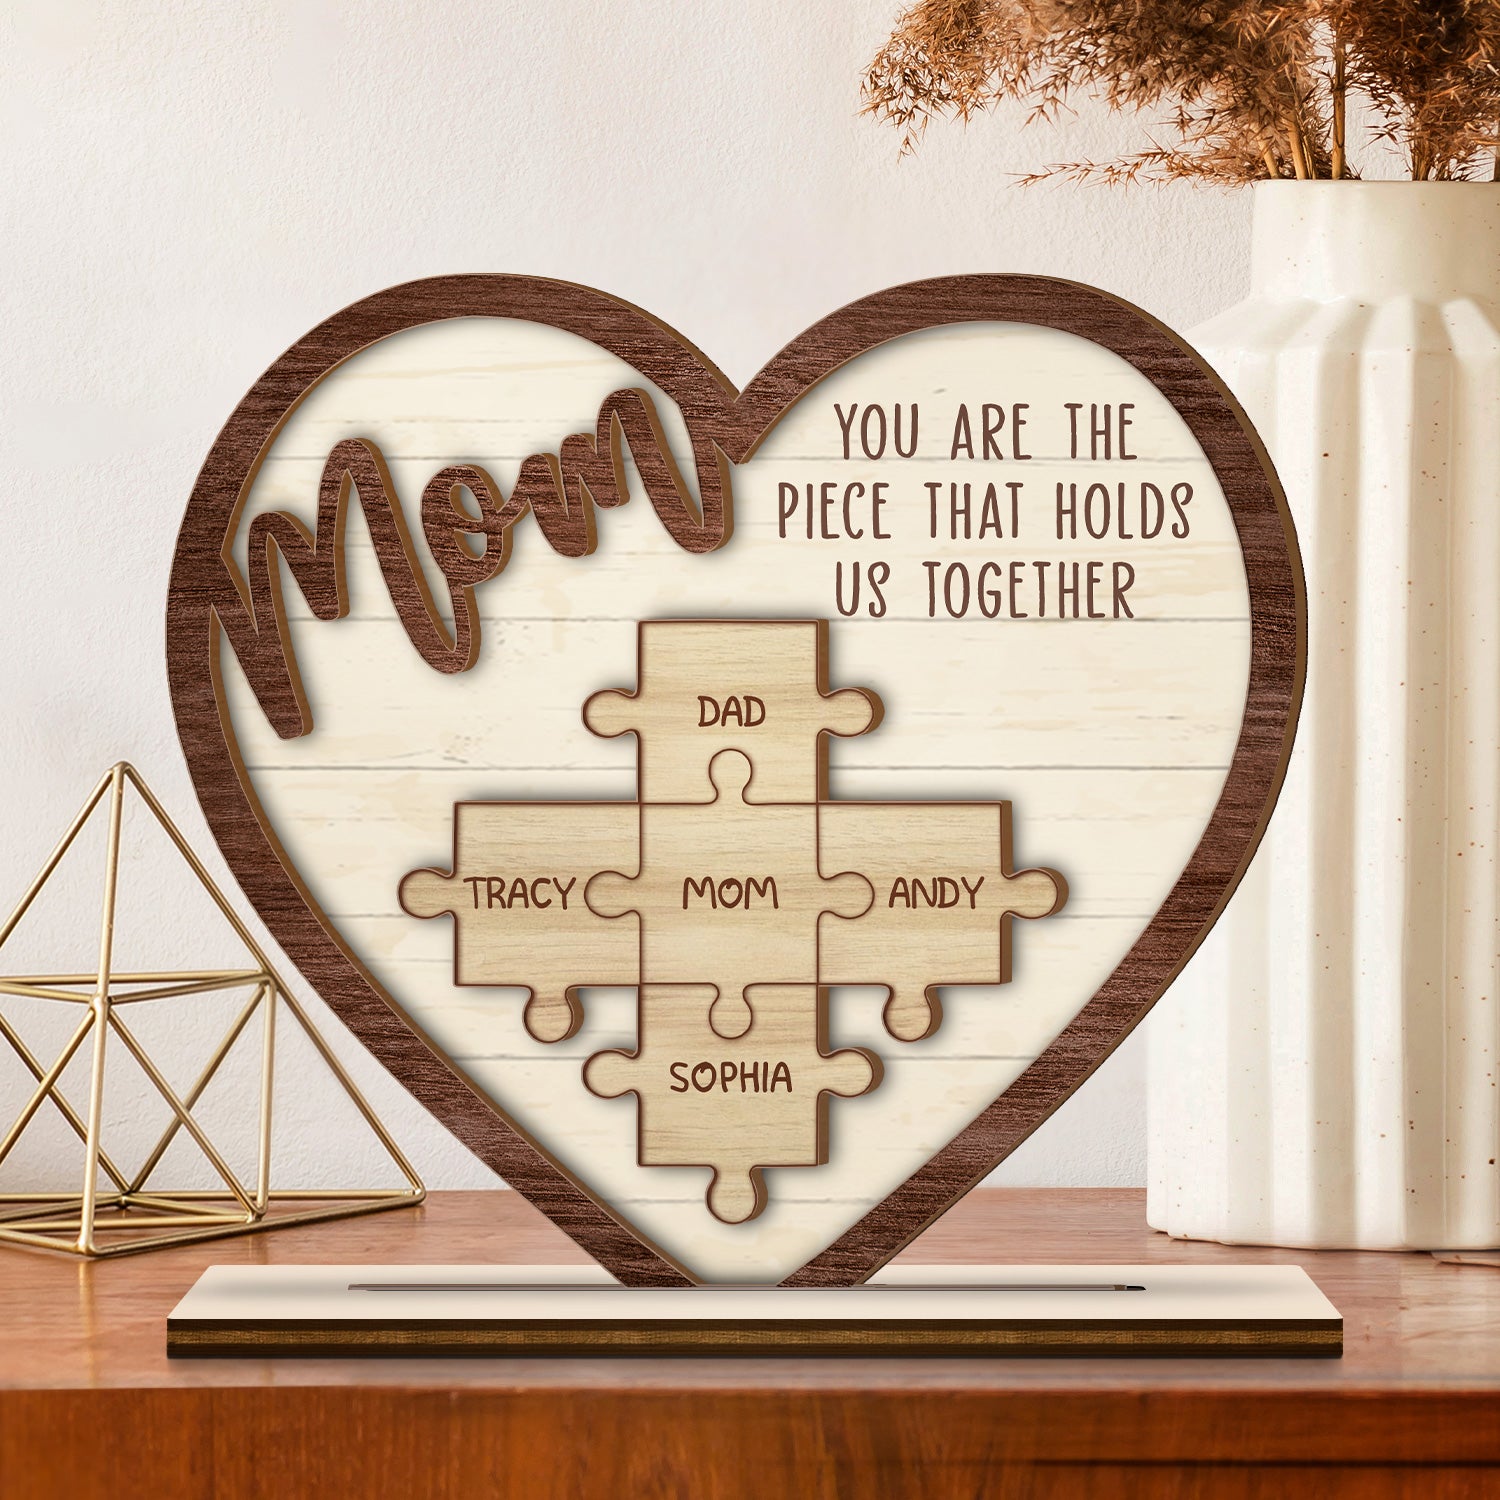 The Piece That Holds Us Together - Gift For Mom, Mother, Grandma - Personalized Custom Shaped 2-Layered Wooden Plaque